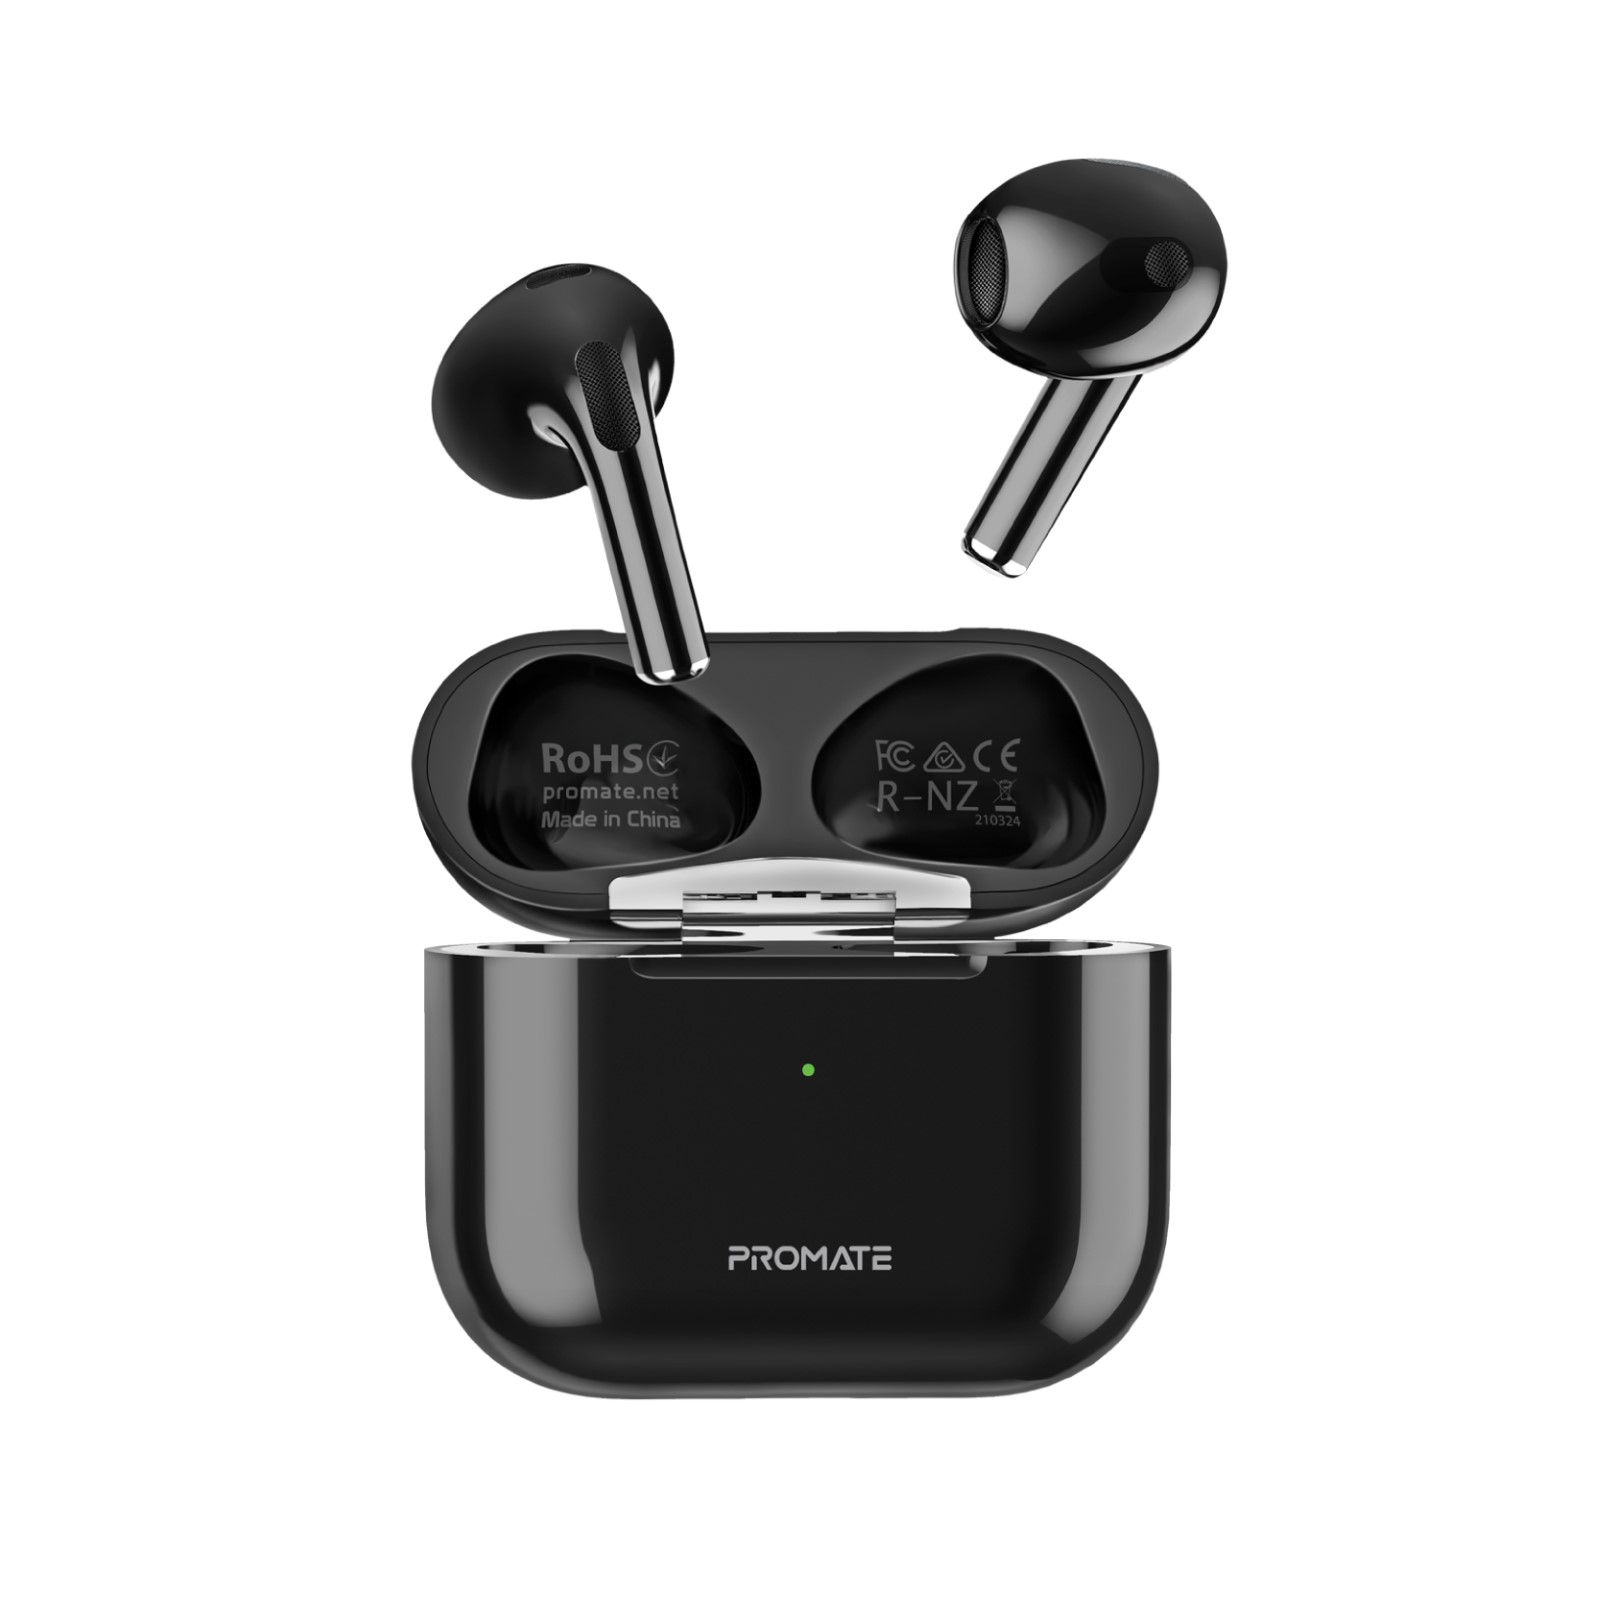 Безжични слушалки ProMate FREEPODS-2, High Definition Bluetooth v5.1 ENC Earphones With IntelliTouch • Smart Touch Control • 22Hours Playing Time • ENC Noise Reduction for Clear Calling , Черен